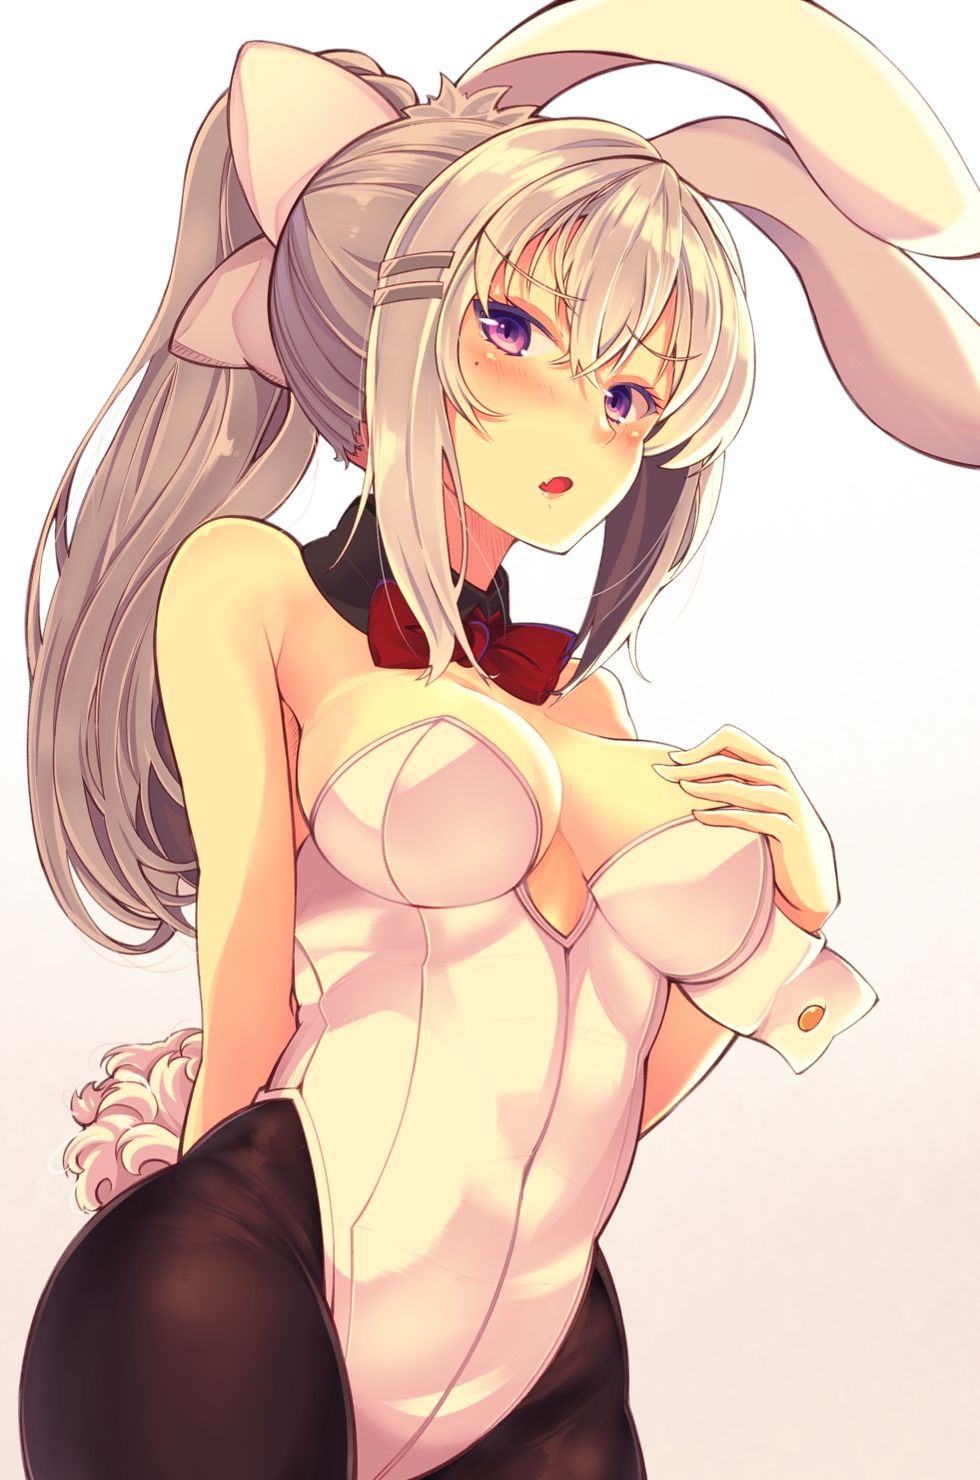 Secondary erotic image of a cute ponytail girl, 24 [ponytail] 18